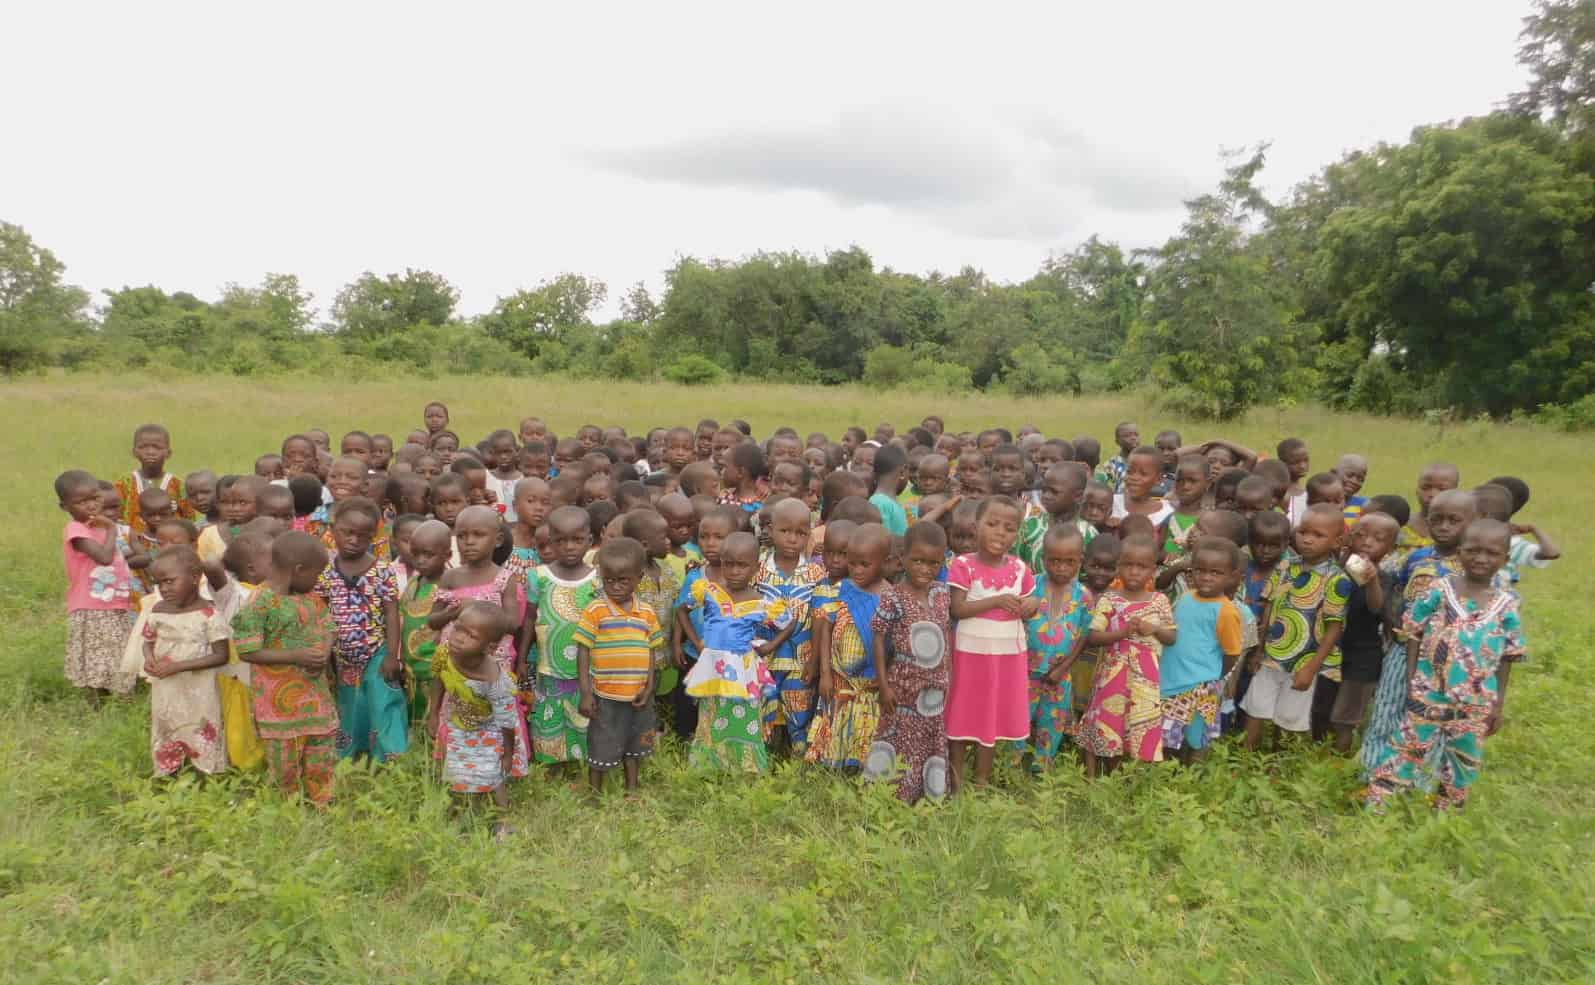 A large group of children in colorful clothes stand in a field in rural Togo.